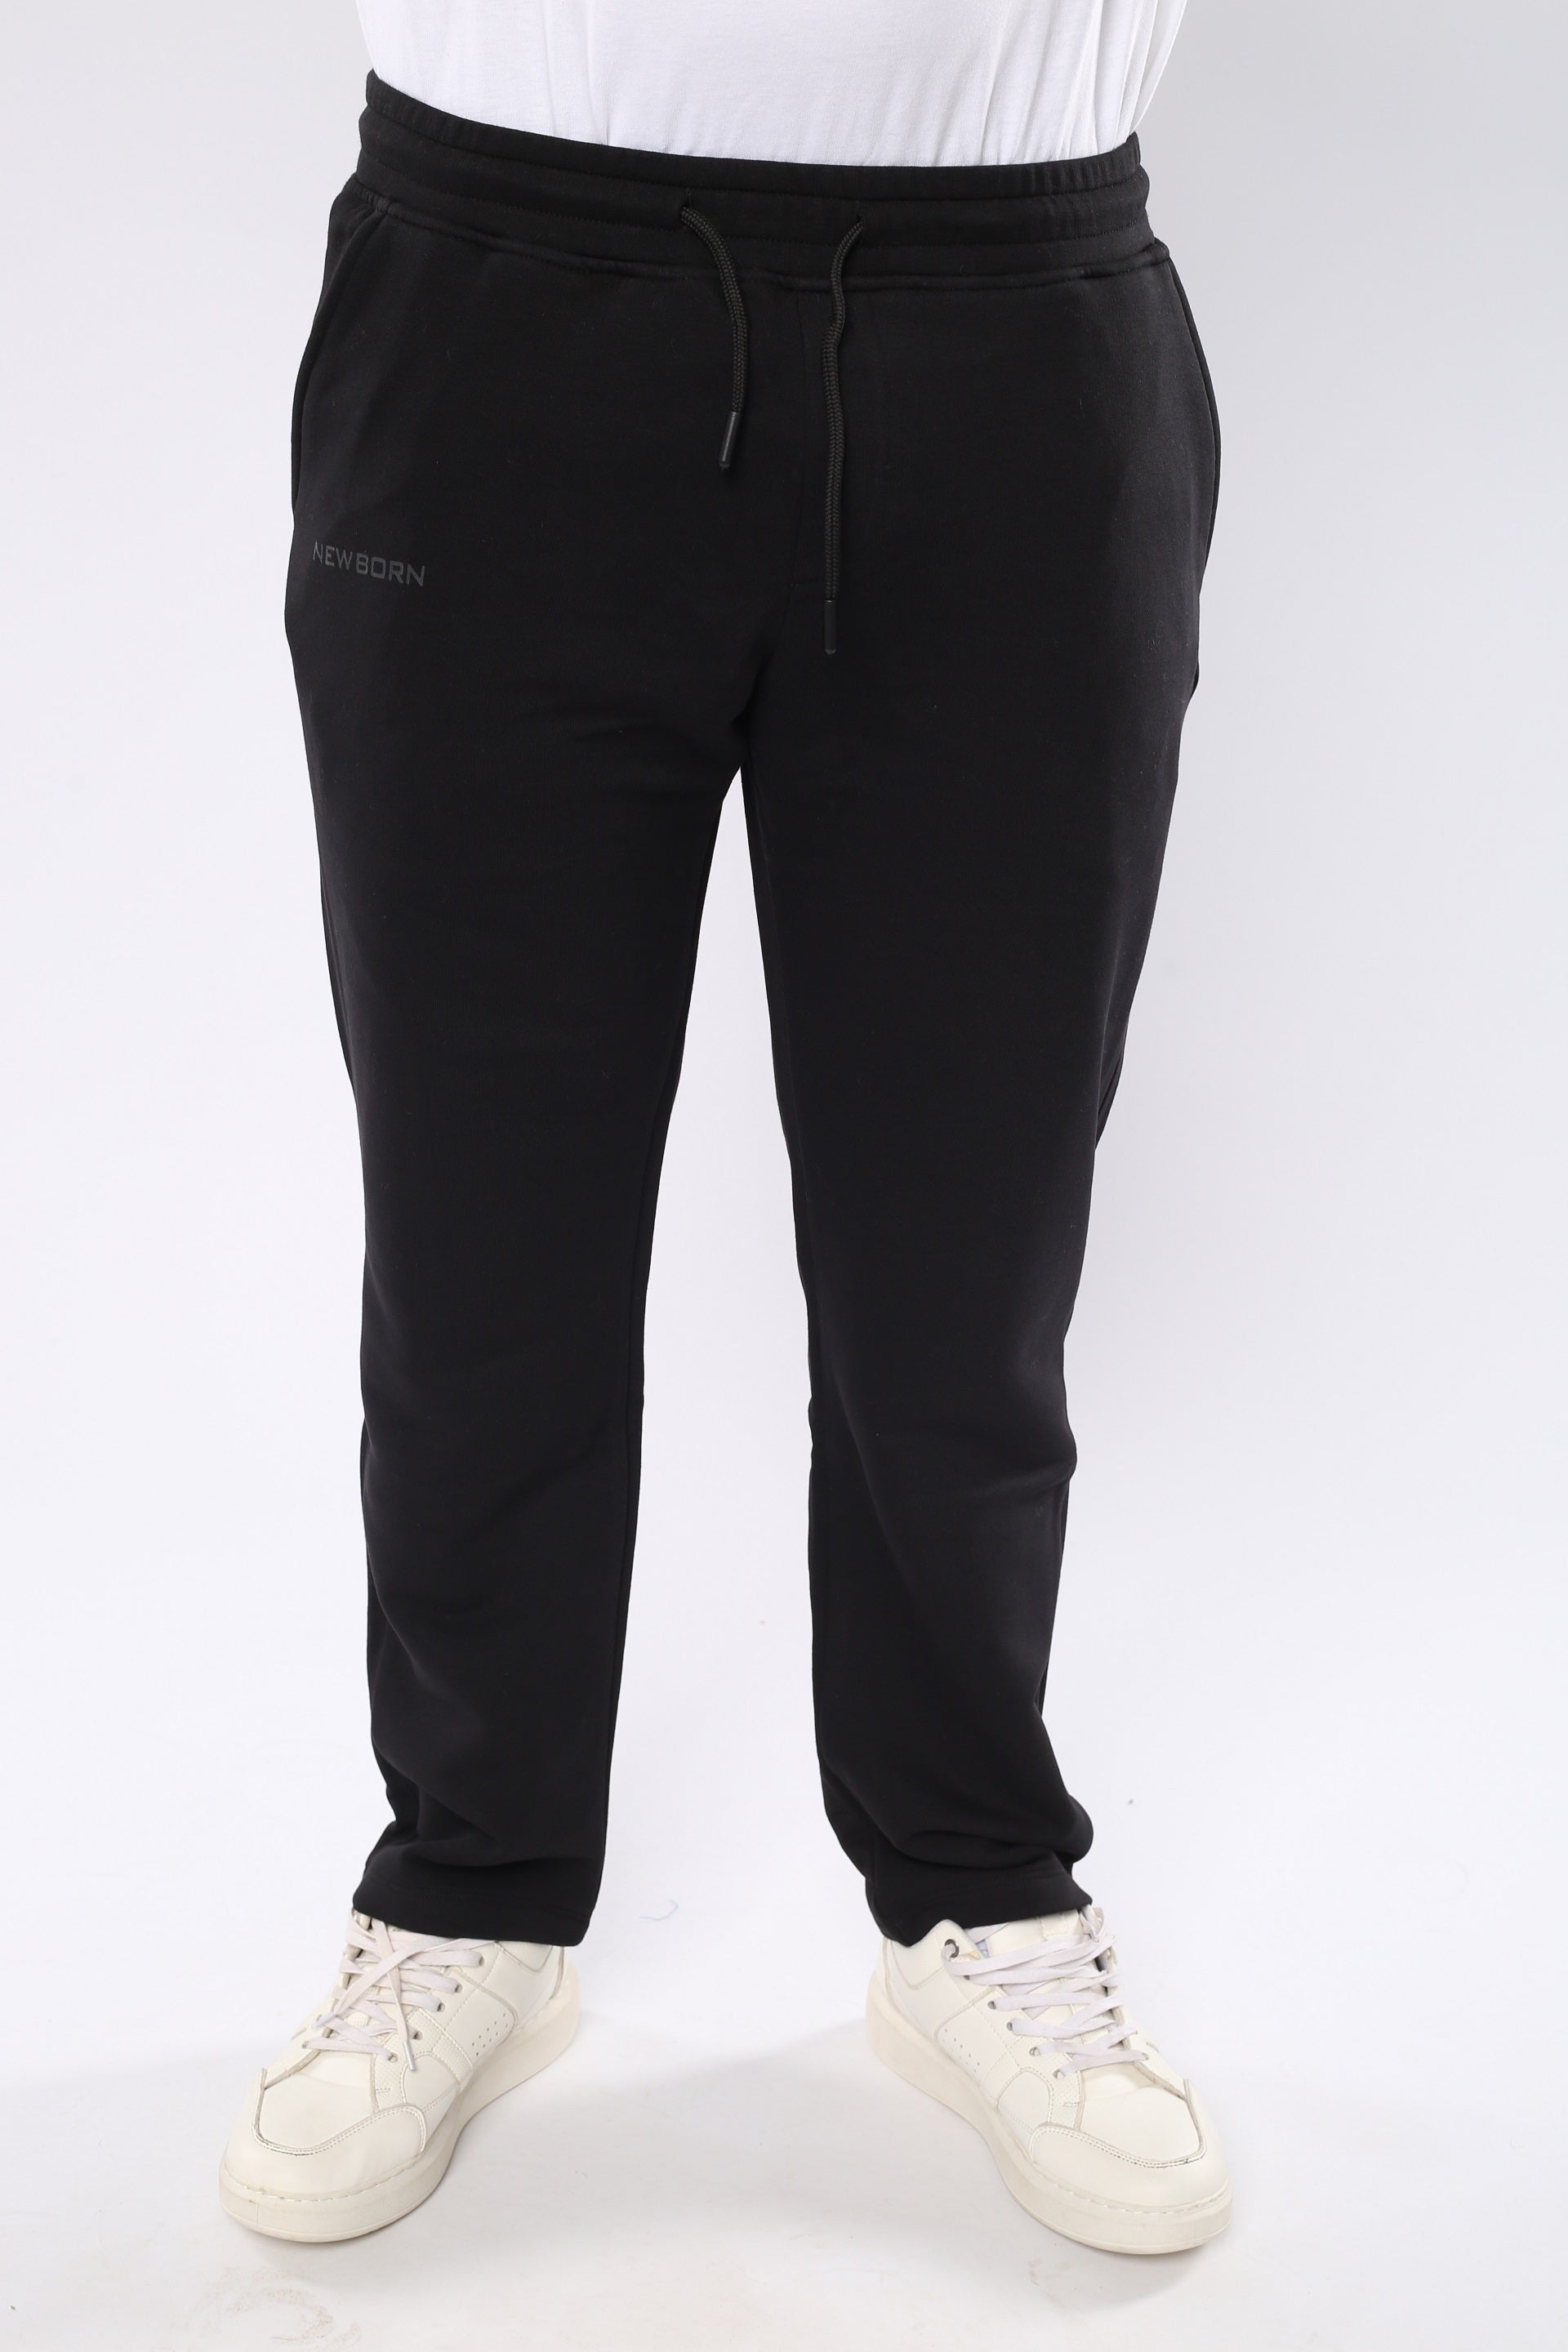 M23NT911-Sporty Sweatpants With drawstring